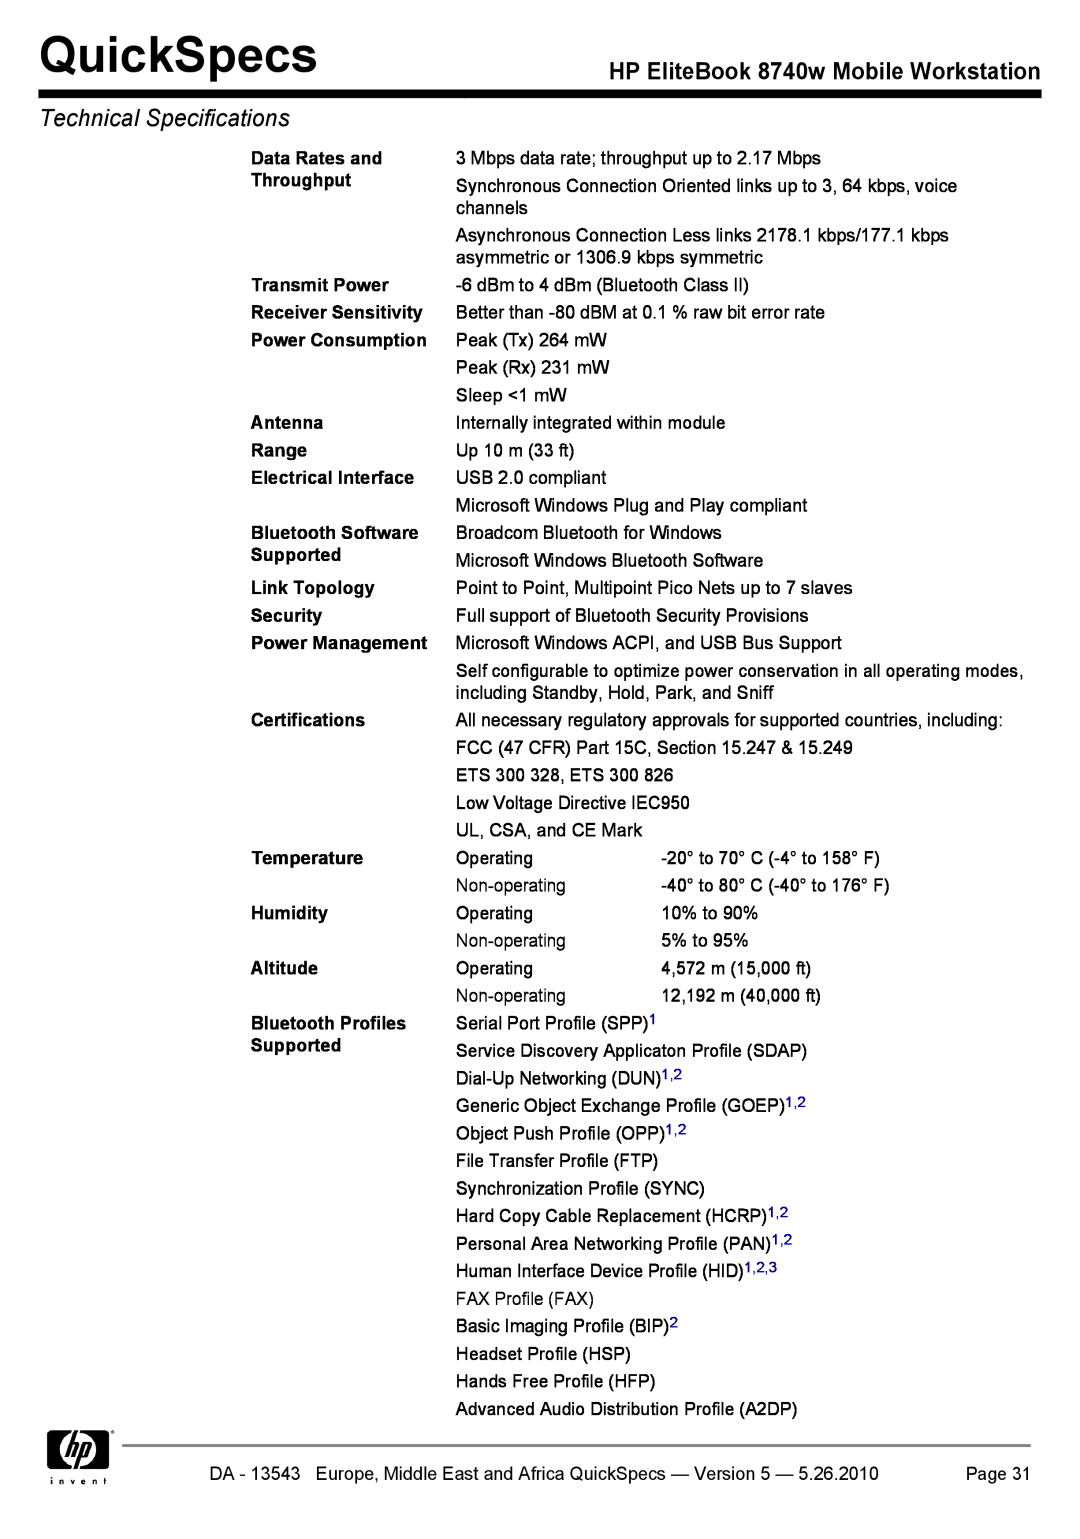 HP manual QuickSpecs, HP EliteBook 8740w Mobile Workstation, Technical Specifications 